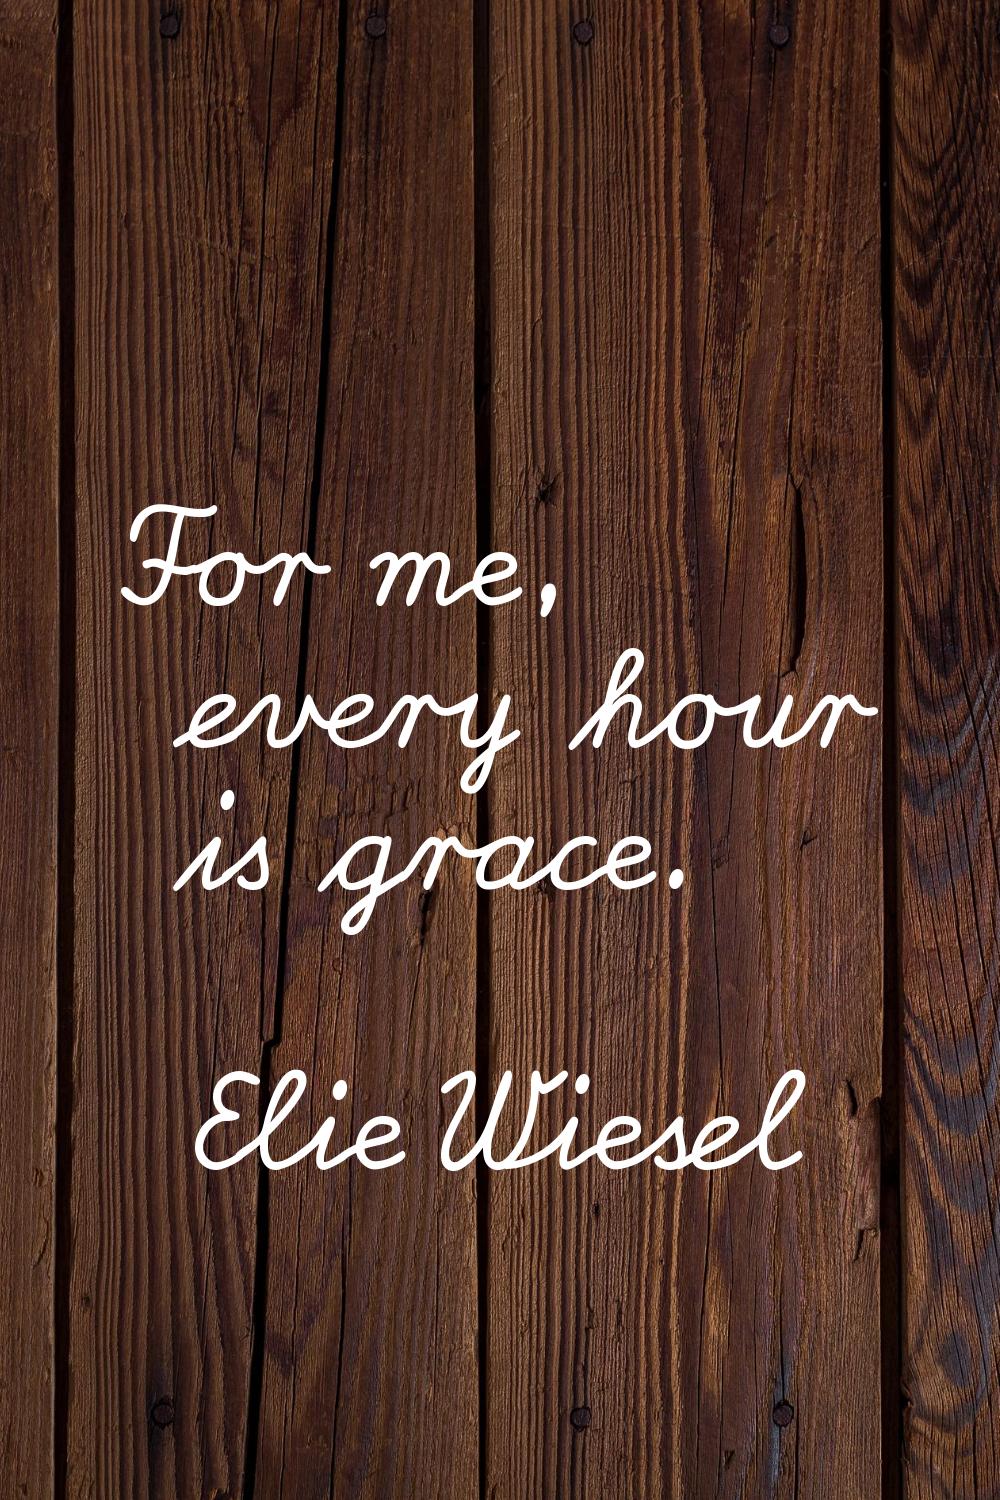 For me, every hour is grace.